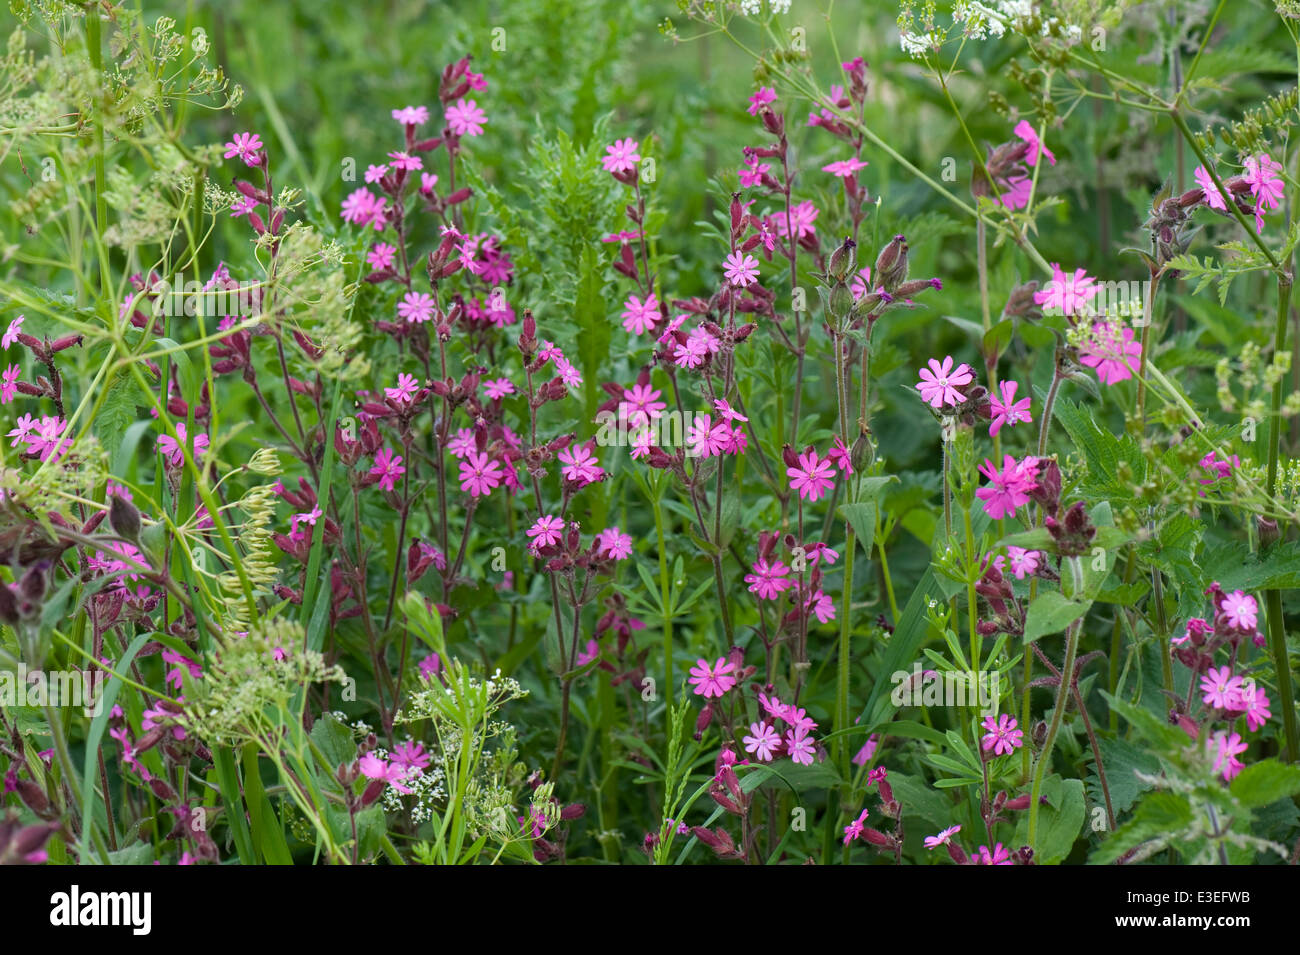 Red campion, Silene dioica, flowering plants Stock Photo